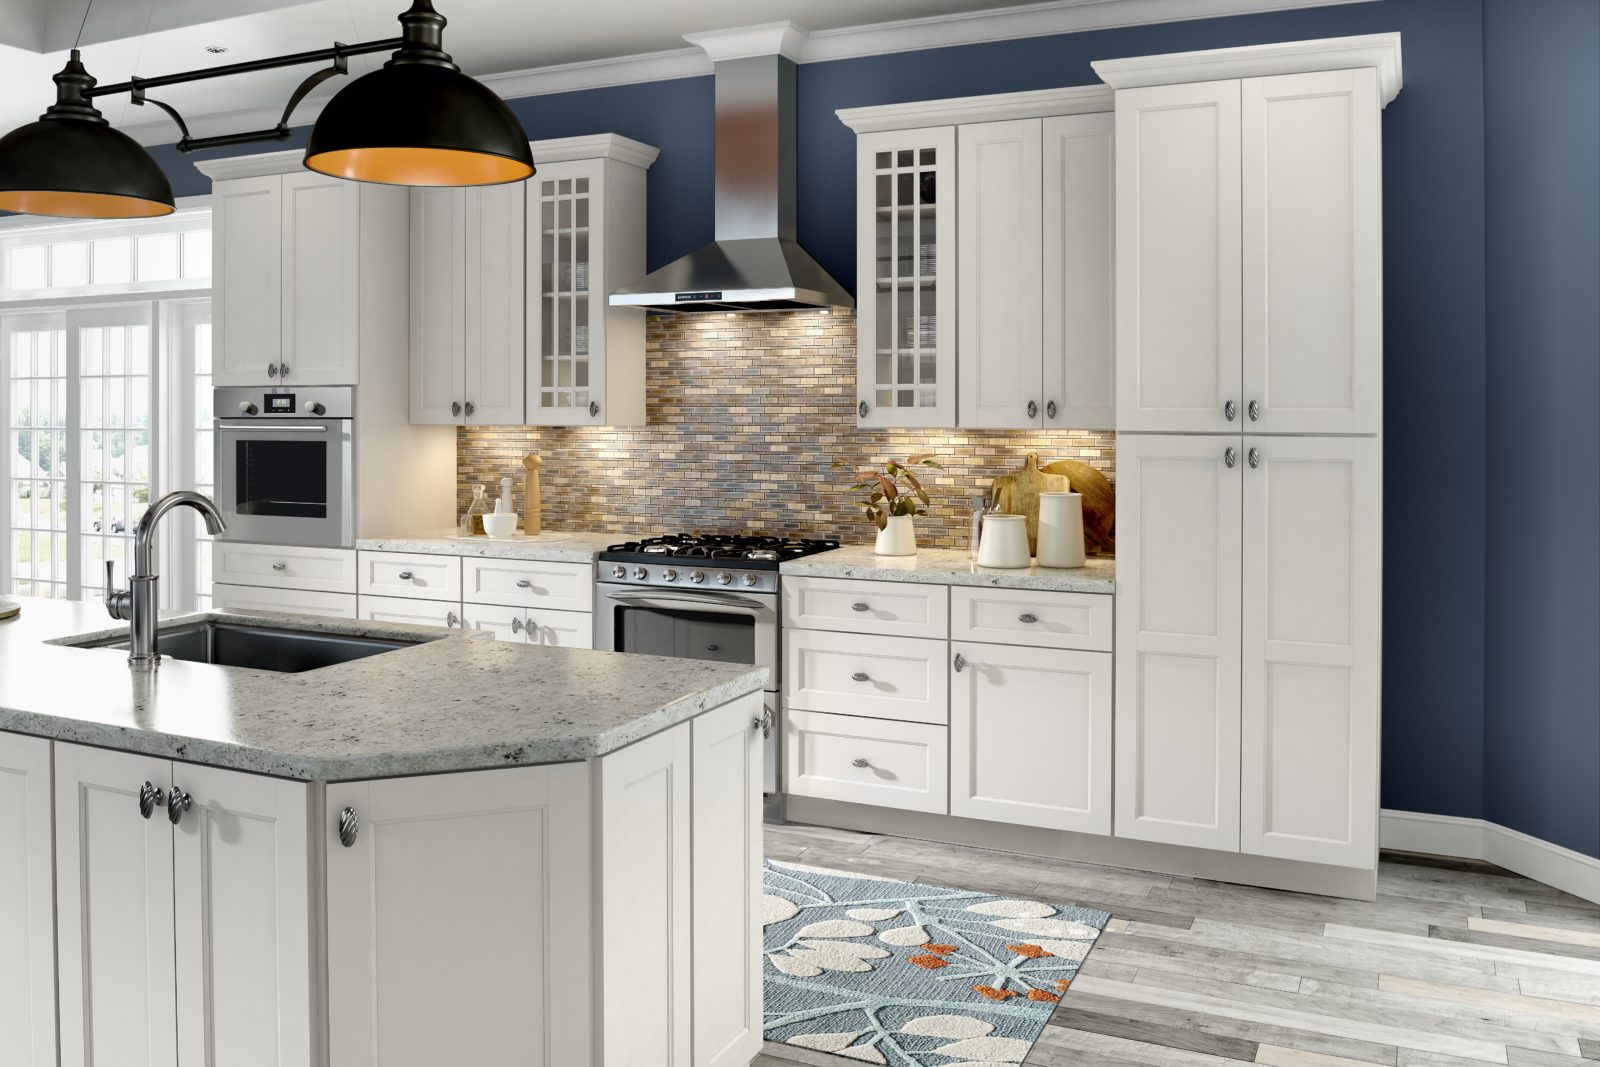 Choosing Cabinets on a Budget - National Design Mart